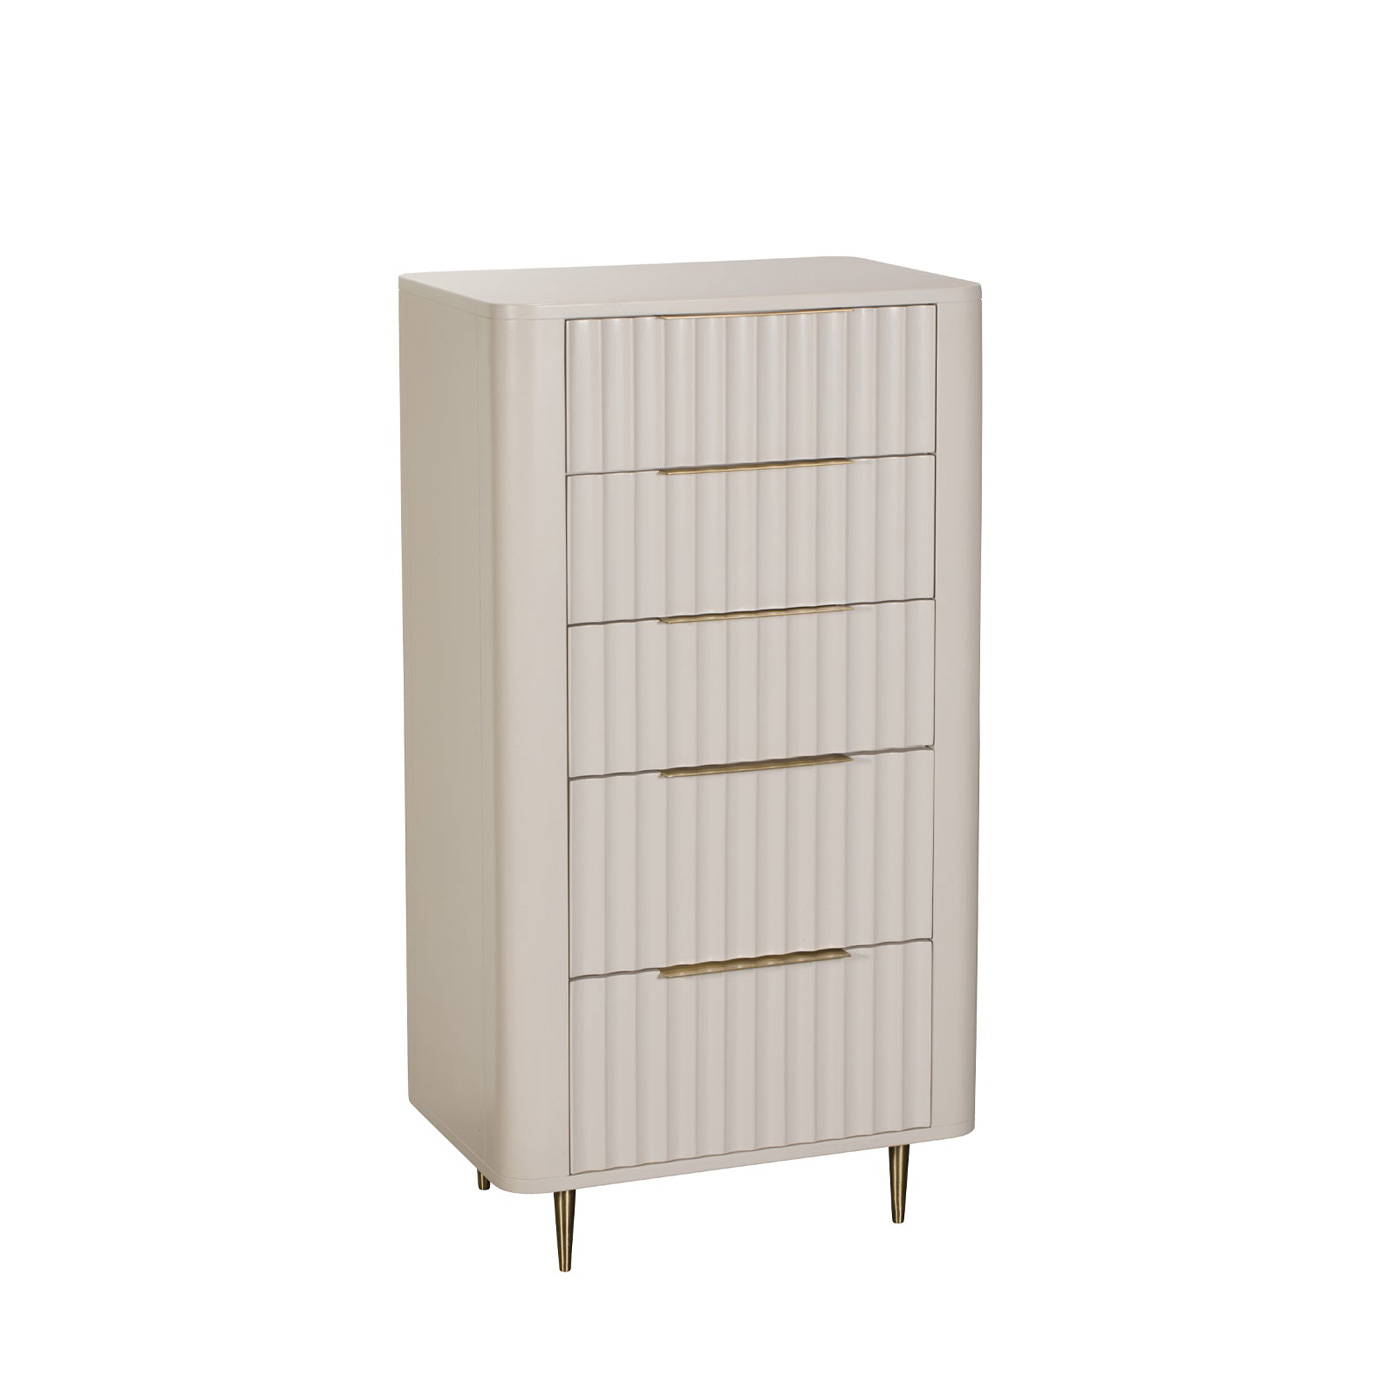 Shop Our Storage Bedroom Chests Online At BF Home In Norwich